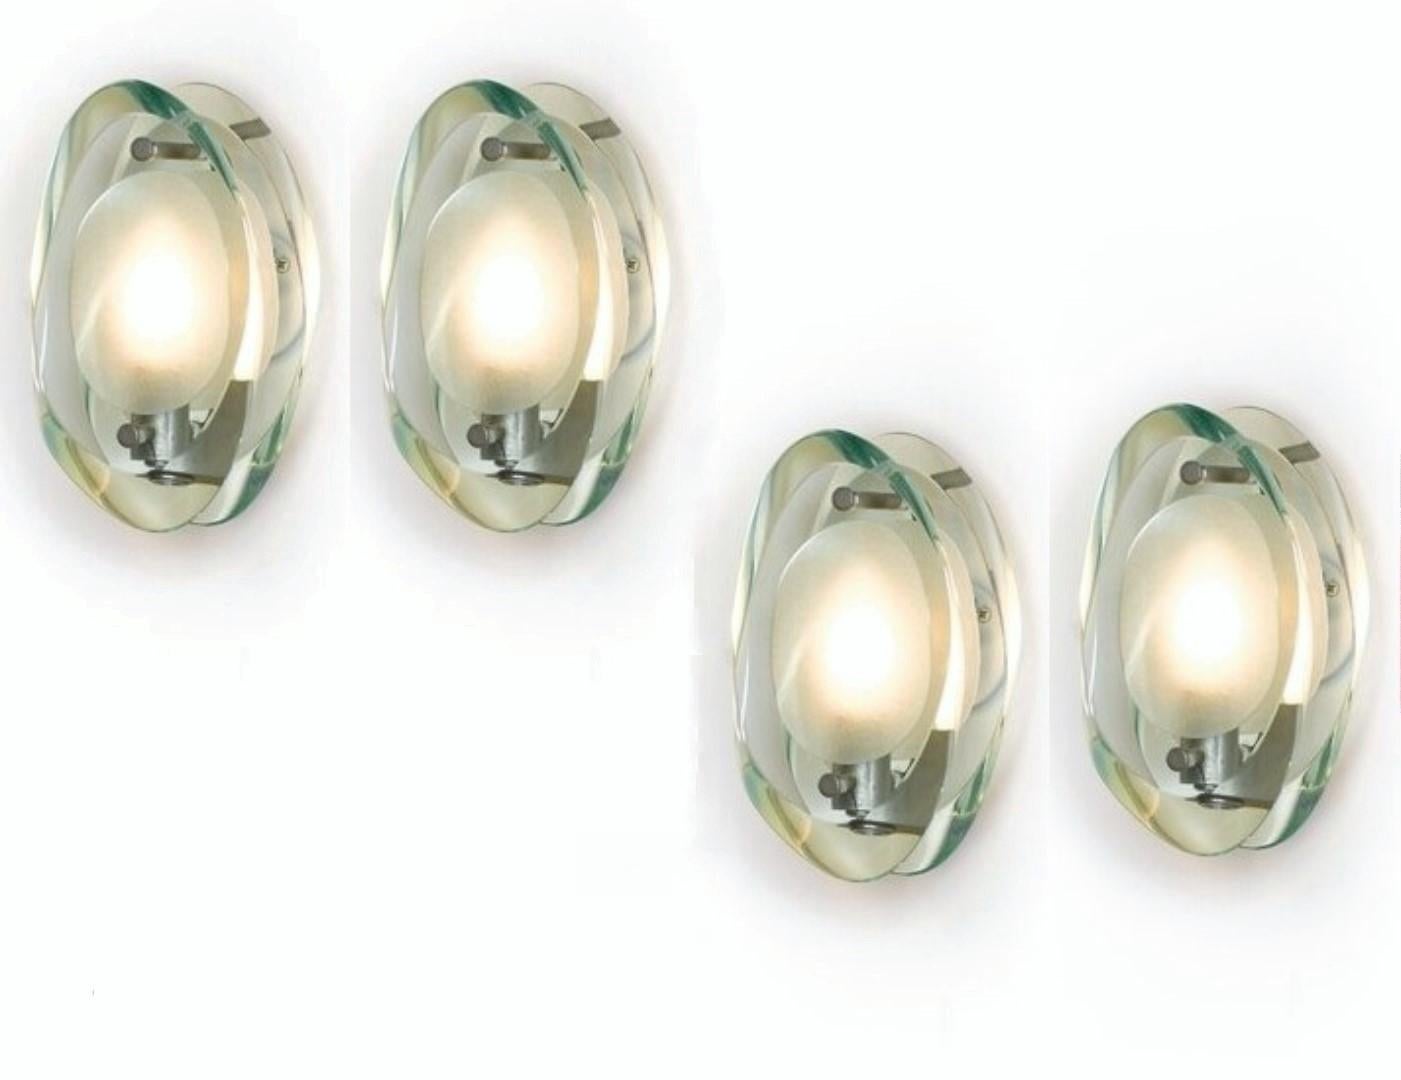 Plated Set of Four Wall Sconces by Max Ingrand for Fontana Arte Model 2093, Italy, 1961